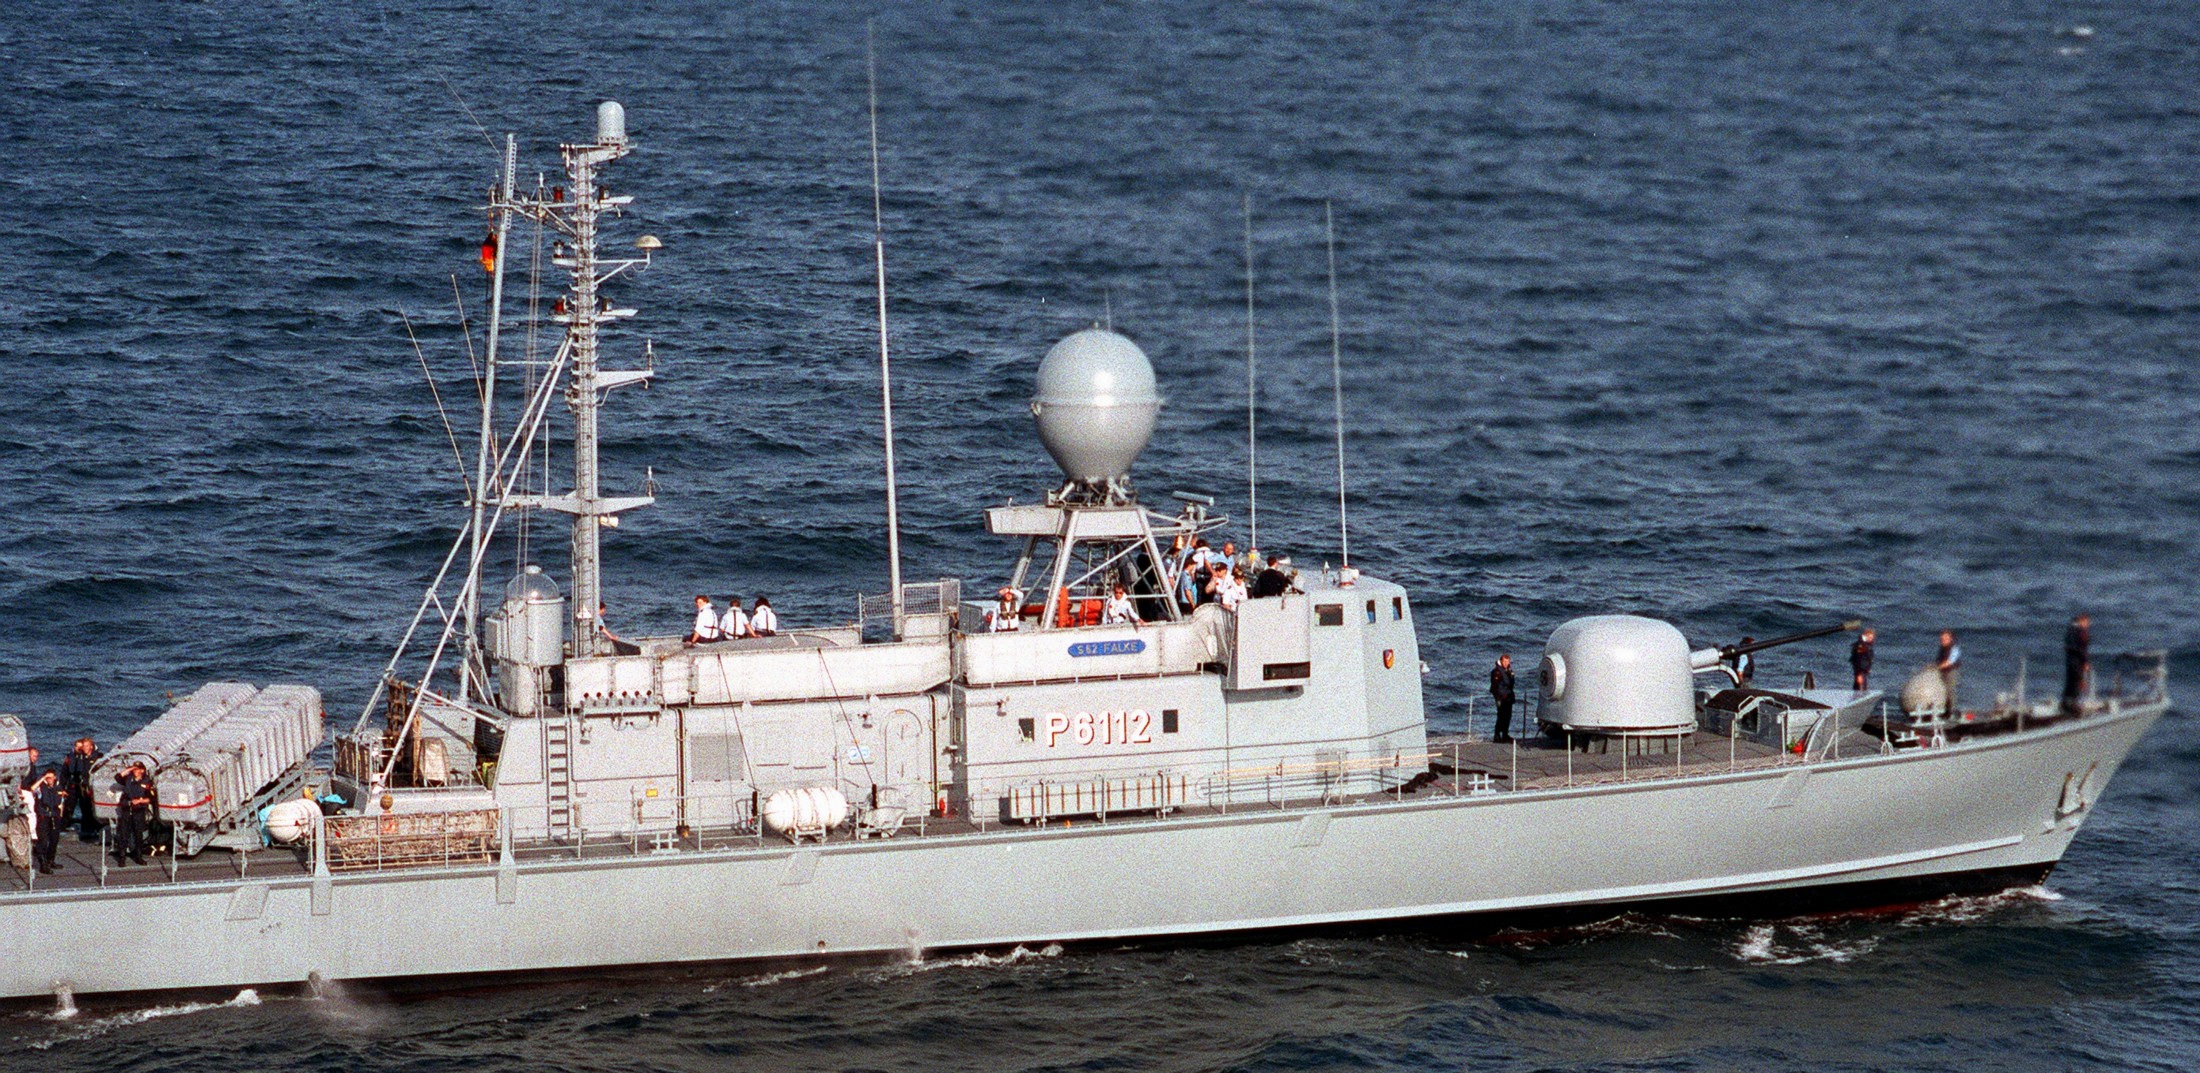 p6112 s62 fgs falke type 143 albatros class fast attack missile craft boat german navy 04